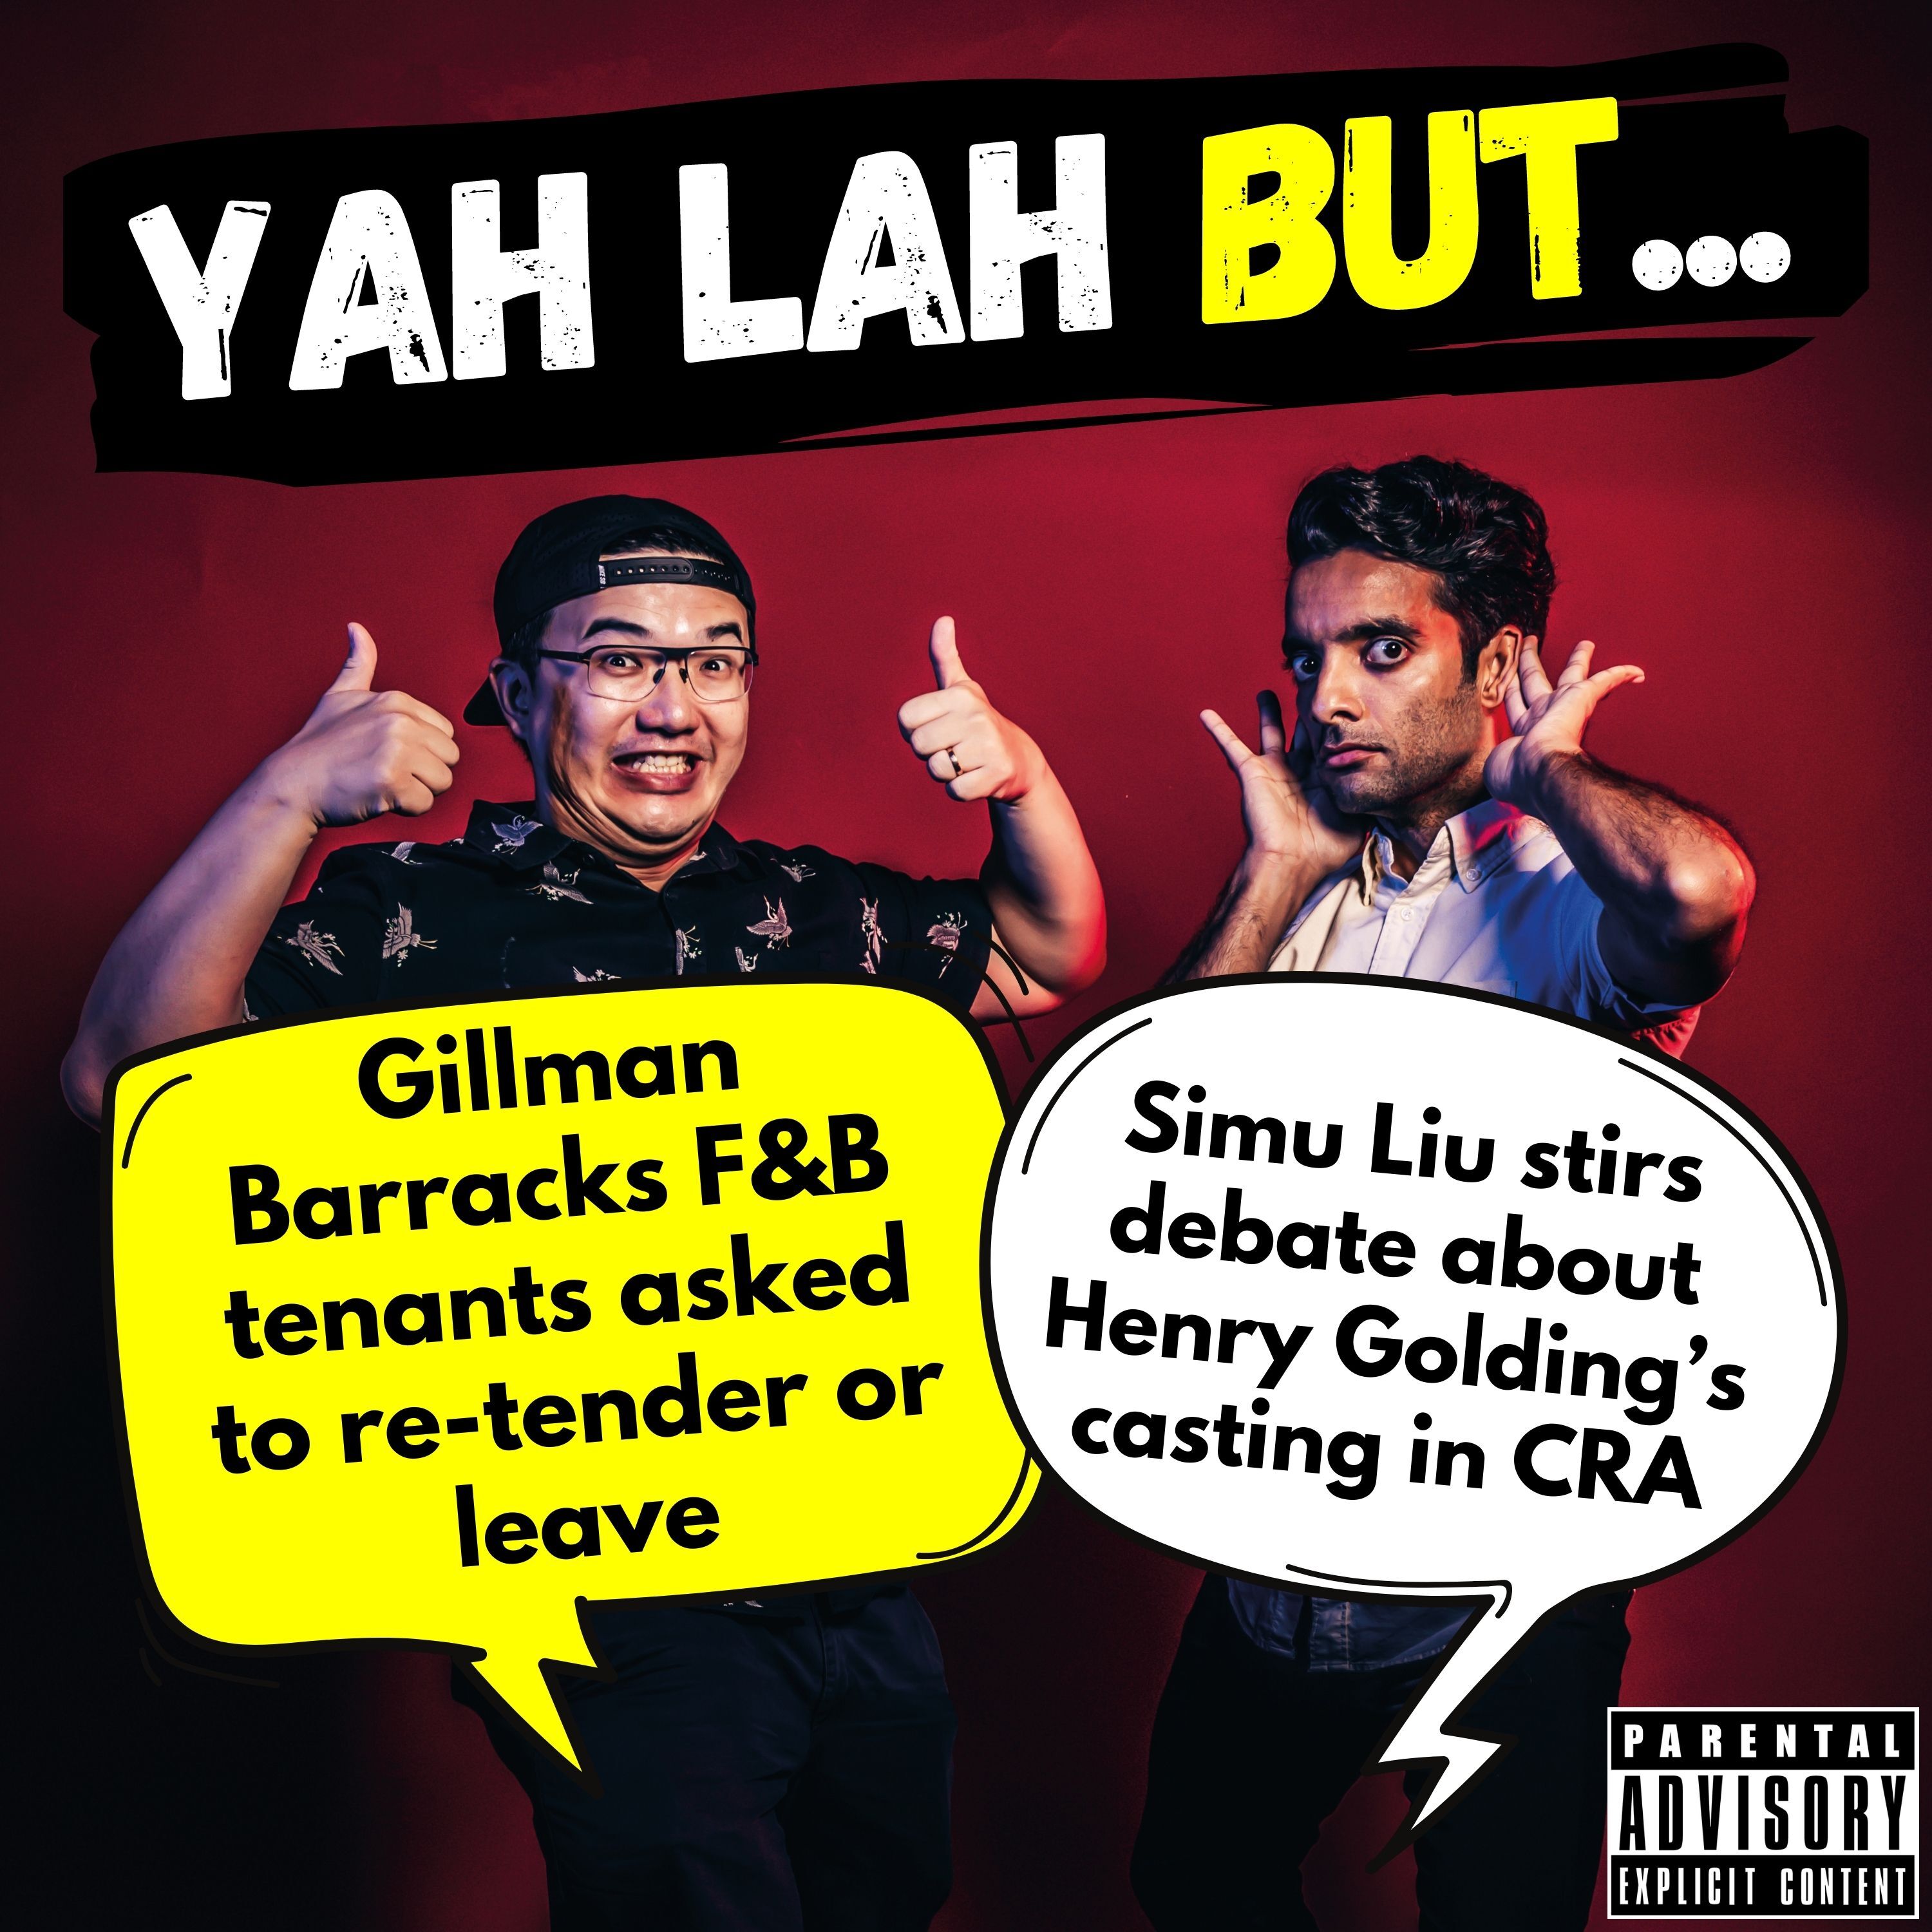 #295 - Gillman Barracks F&B tenants asked to re-tender or leave & Simu Liu stirs debate about Henry Golding’s casting in CRA